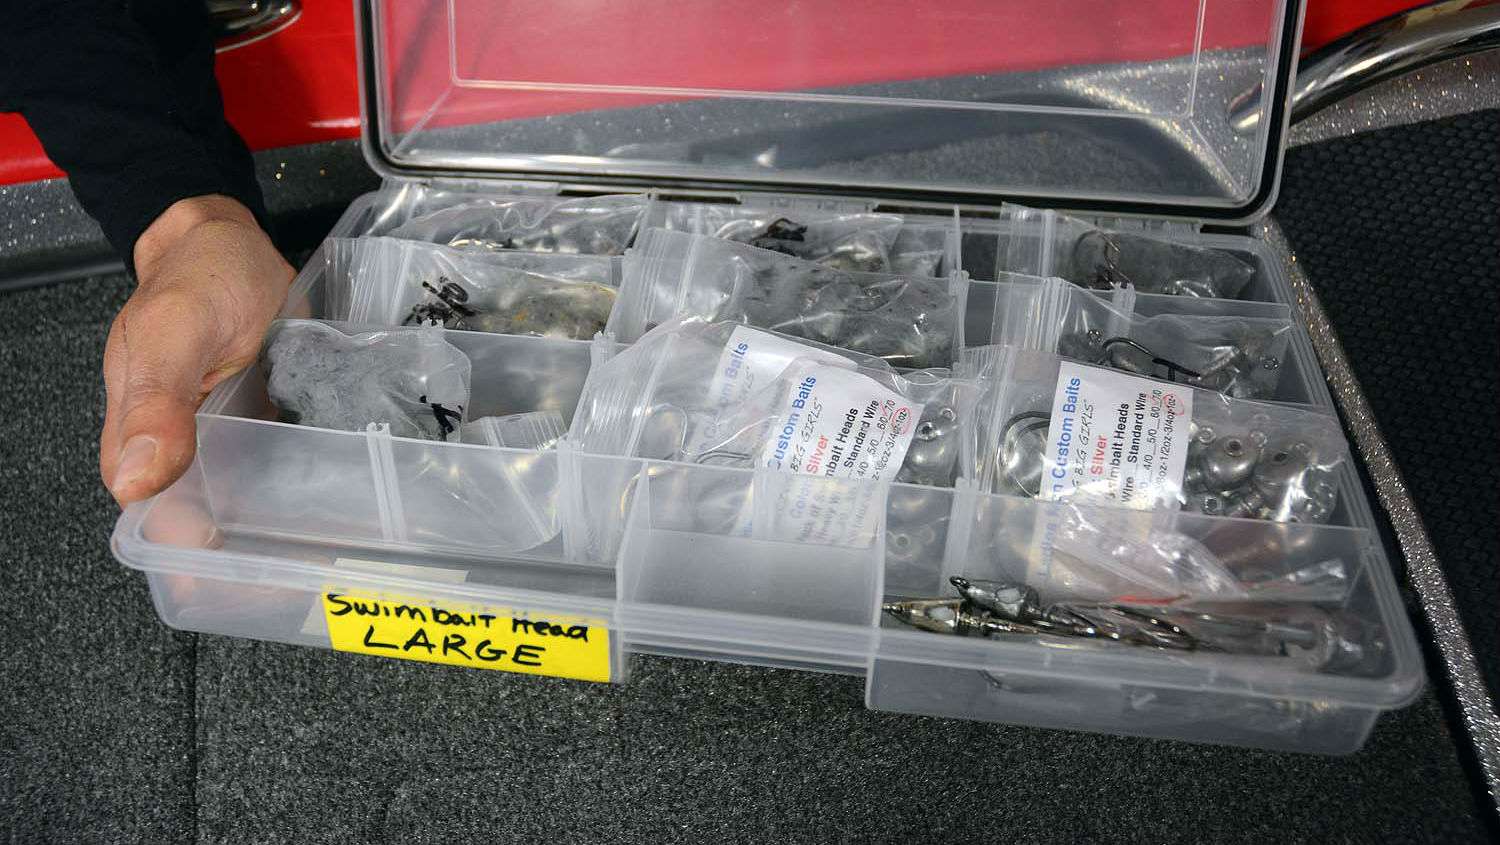 Call this organization within organization. Lucas stores swimbait heads inside plastic bags according to weight. Those can easily look identical and searching randomly inside a box of leadheads for the right size is too time consuming on the water. 